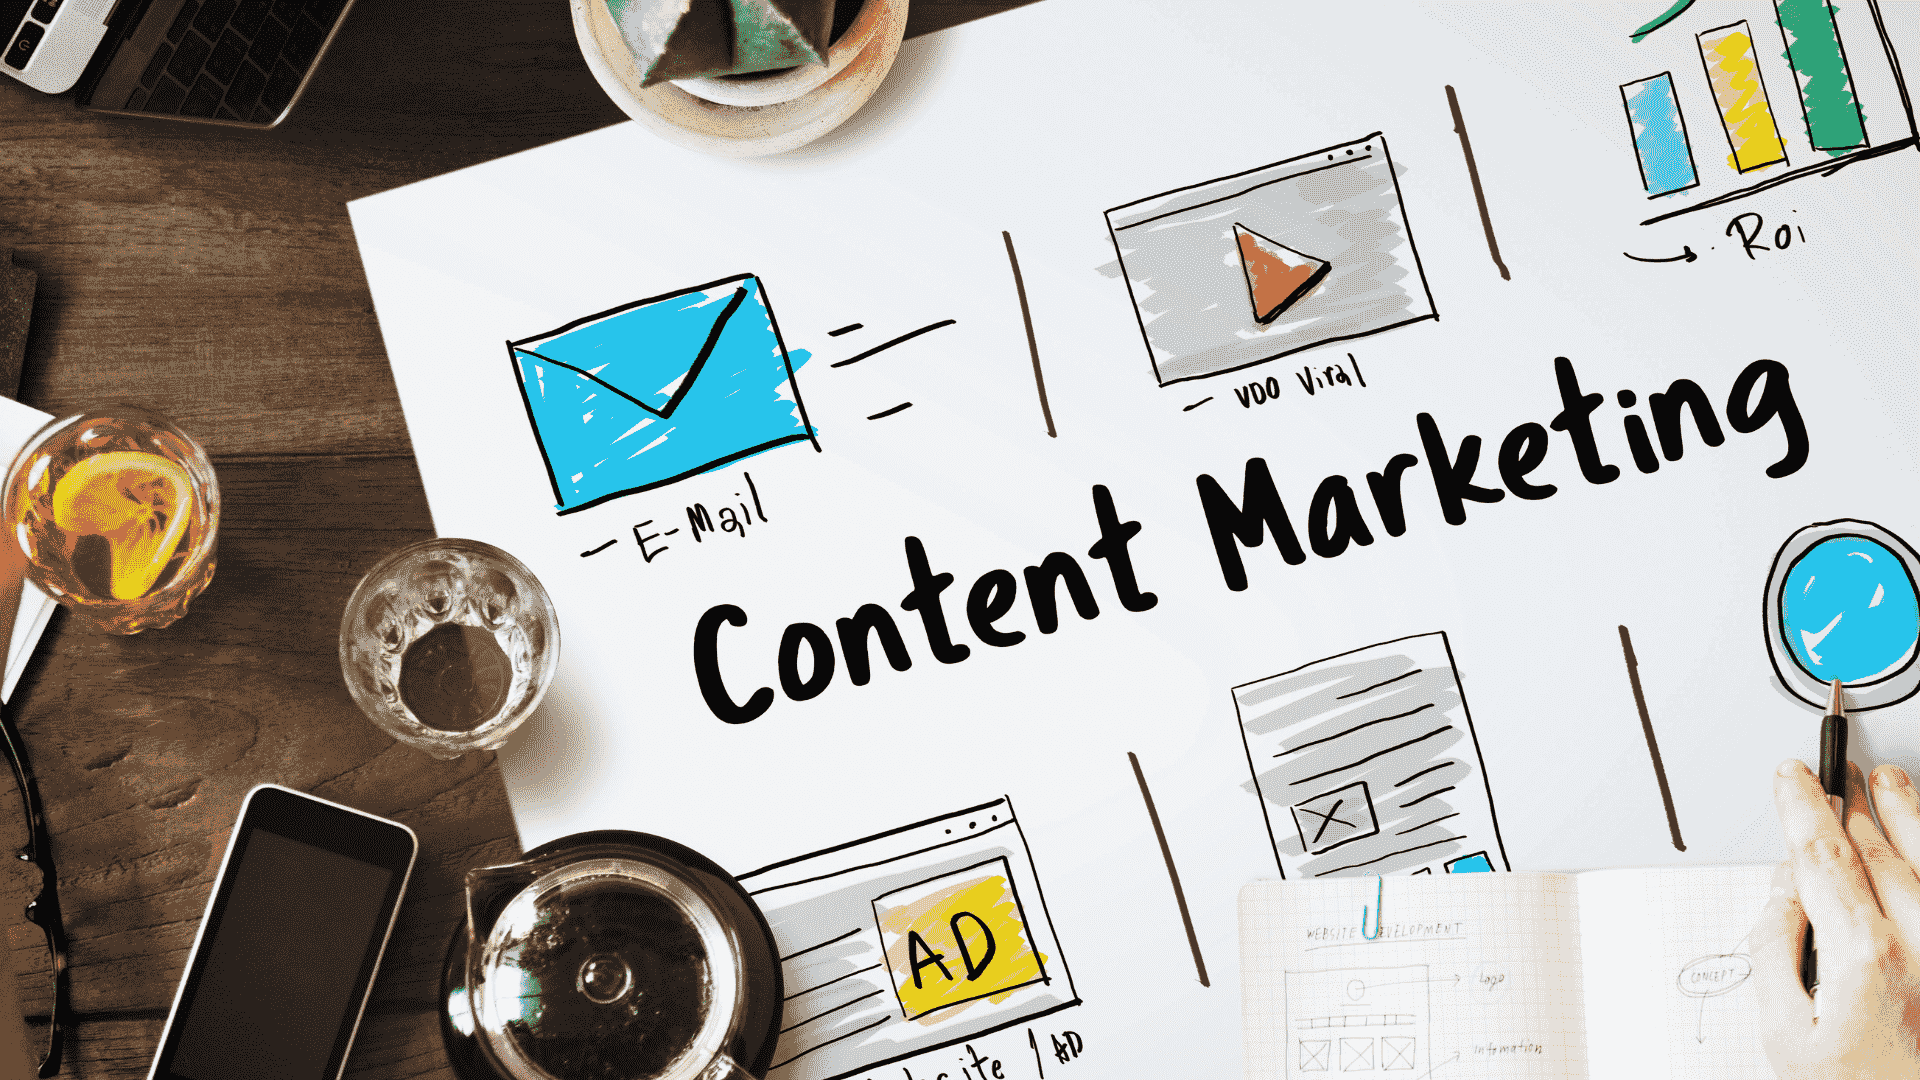 Content Marketing for SEO: How to Optimize Your Content to Rank Higher in Search Engines